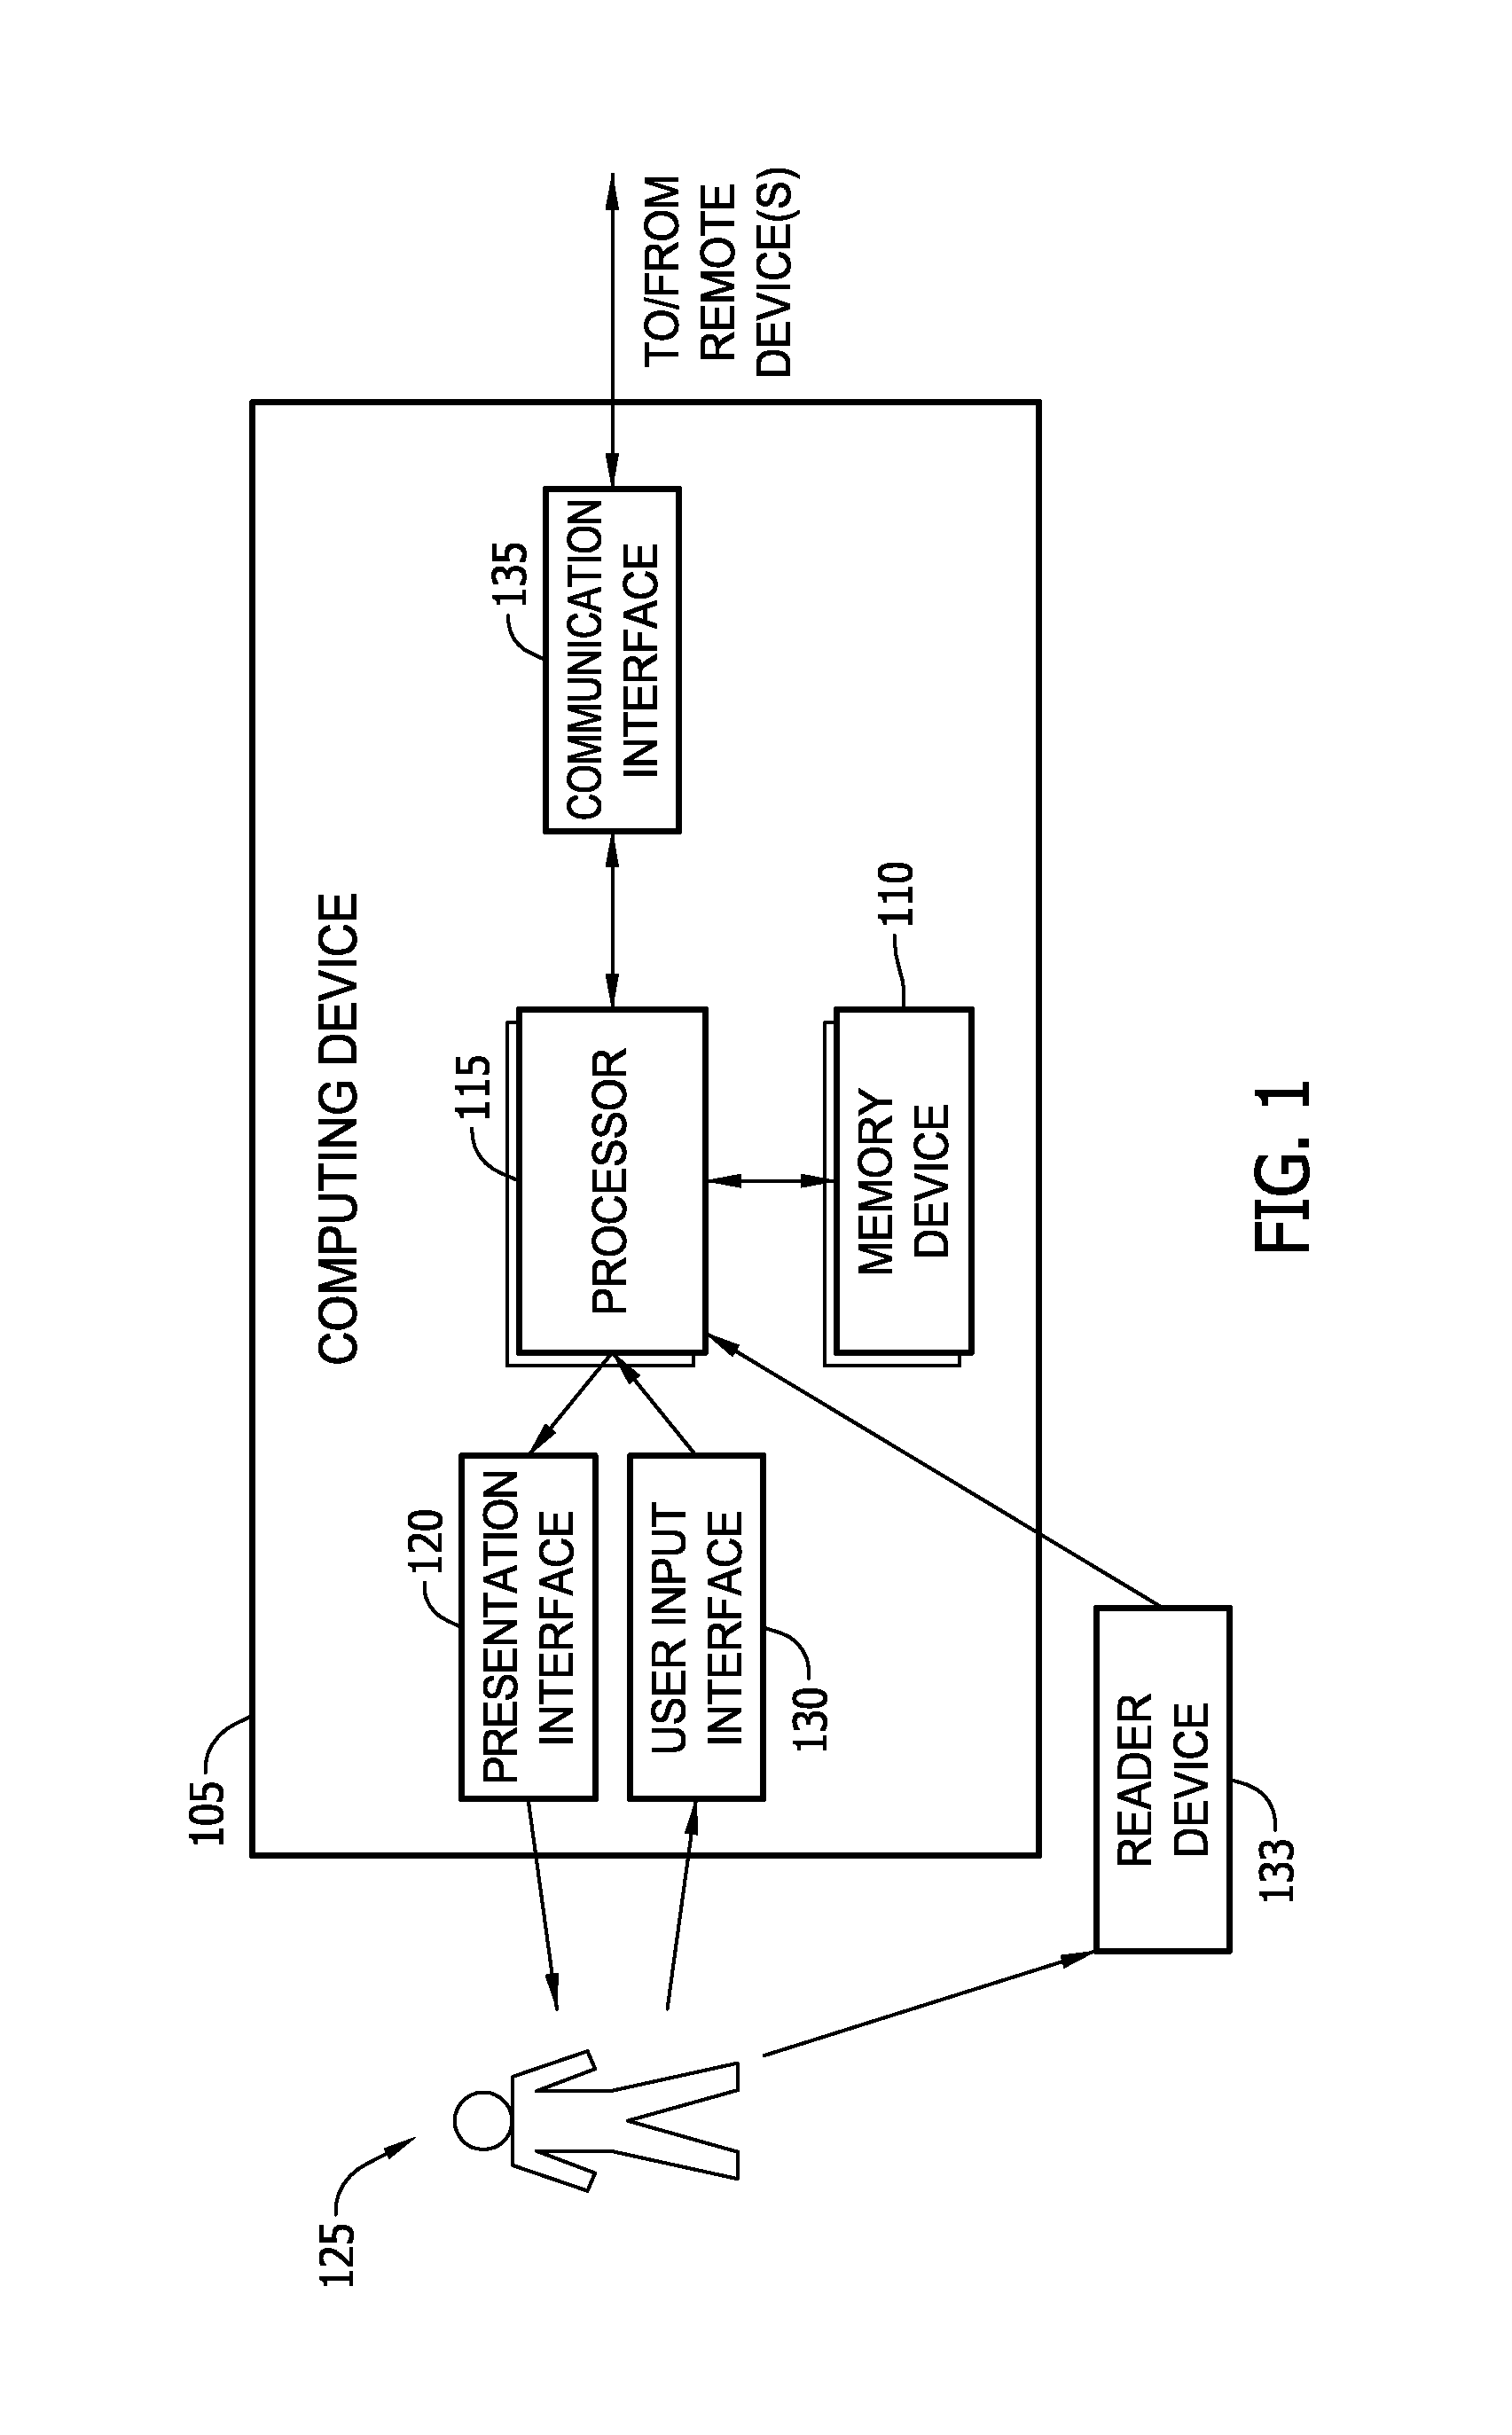 Method and system for use in facilitating patch change management of industrial control systems